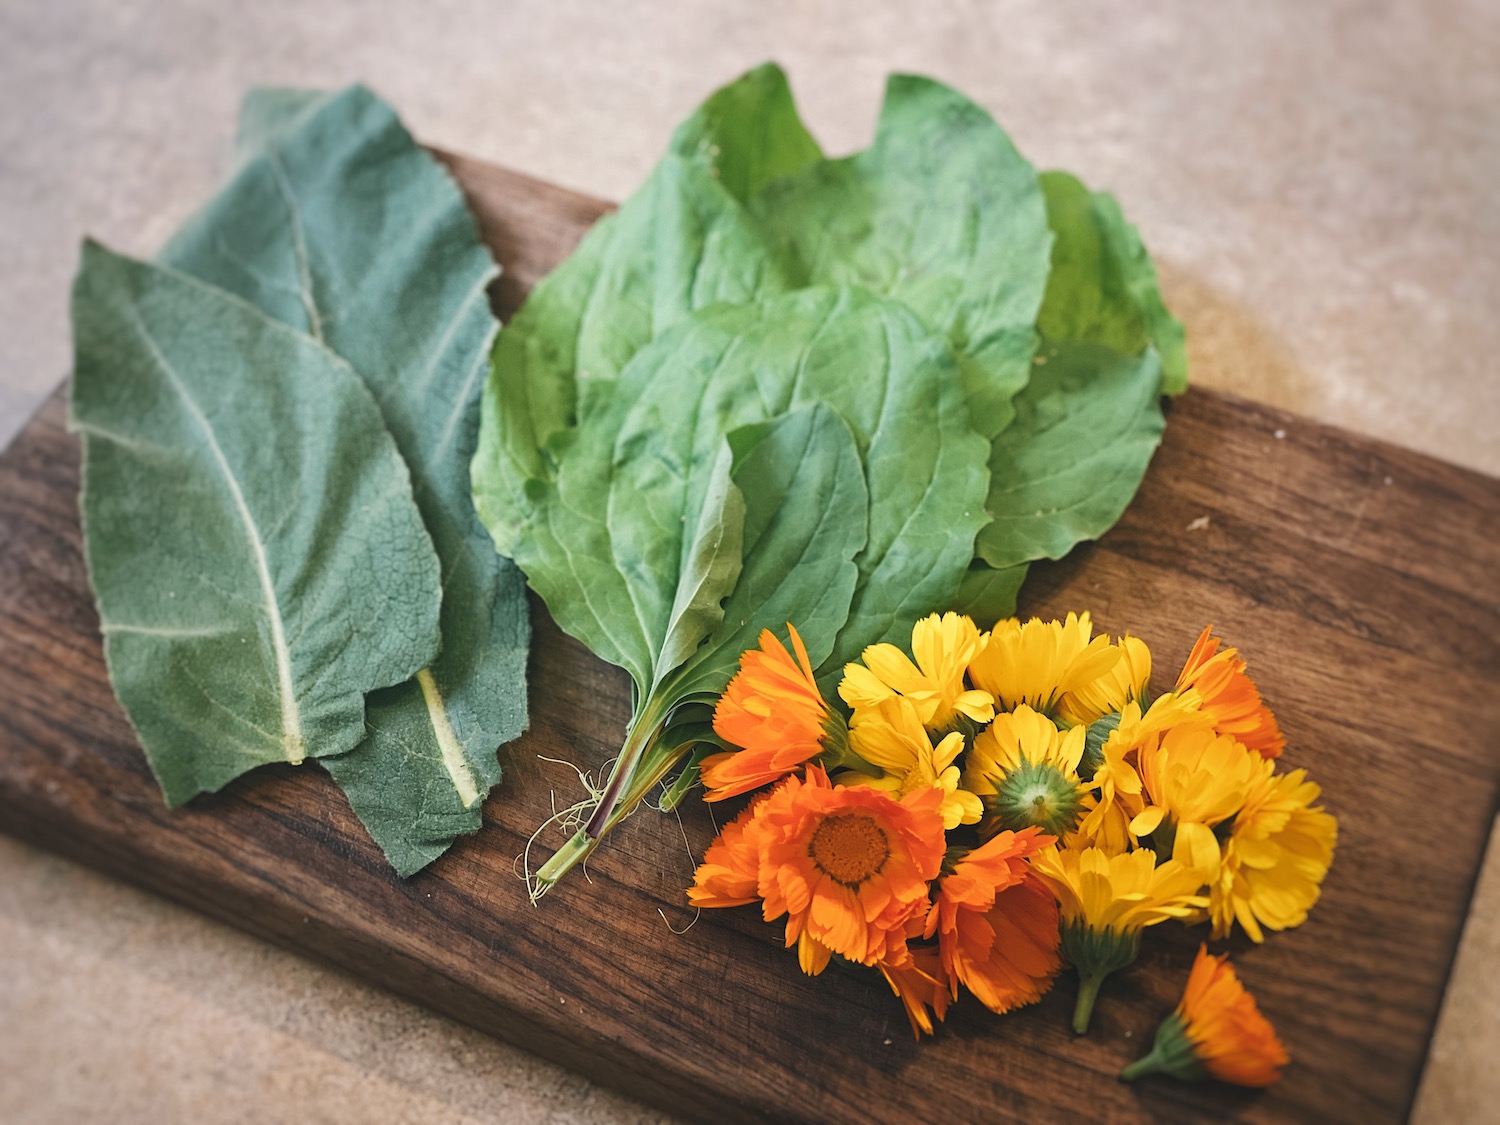 Fresh mullein, plantain and calendula flowers laid out on a cutting board.